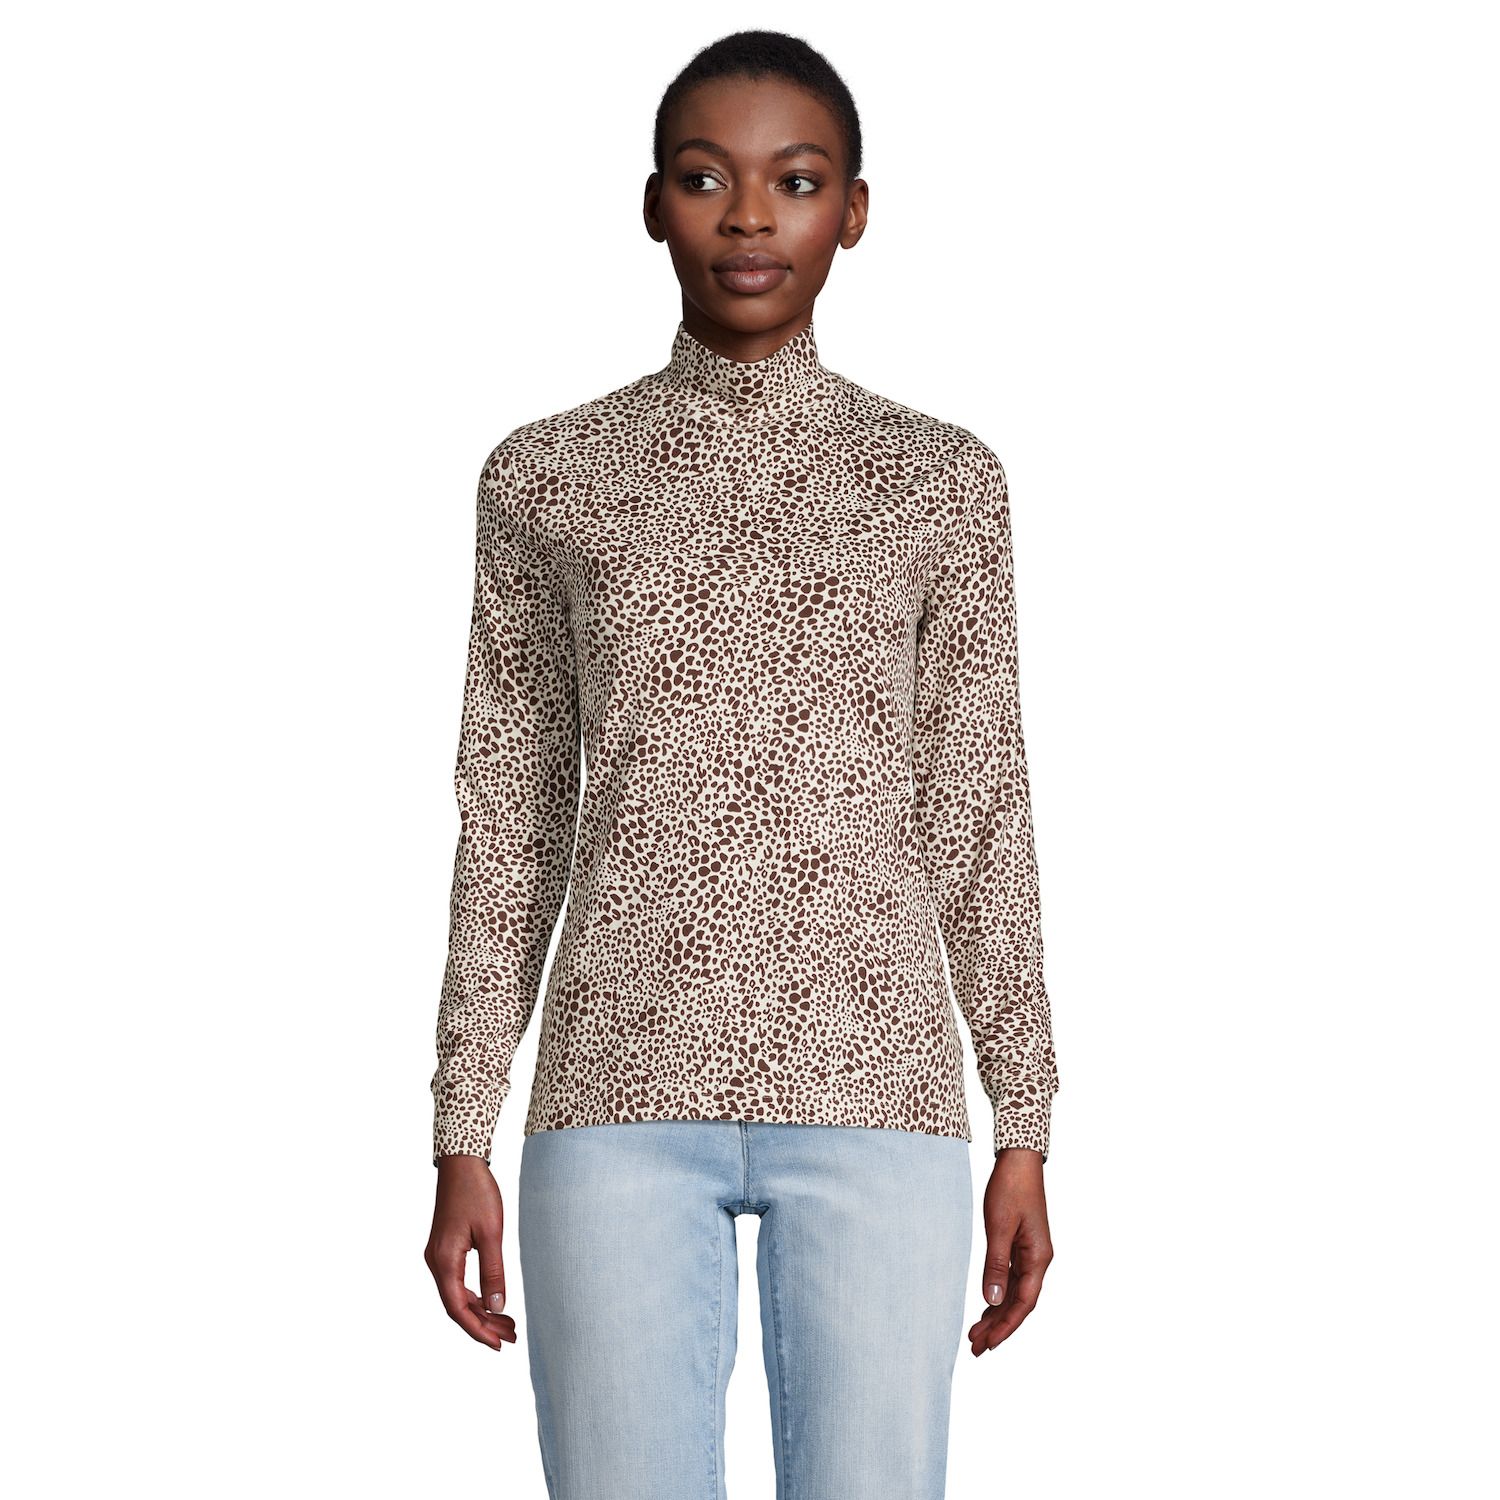 Image for Lands' End Petite Relaxed Cotton Long Sleeve Mock Turtleneck Top at Kohl's.